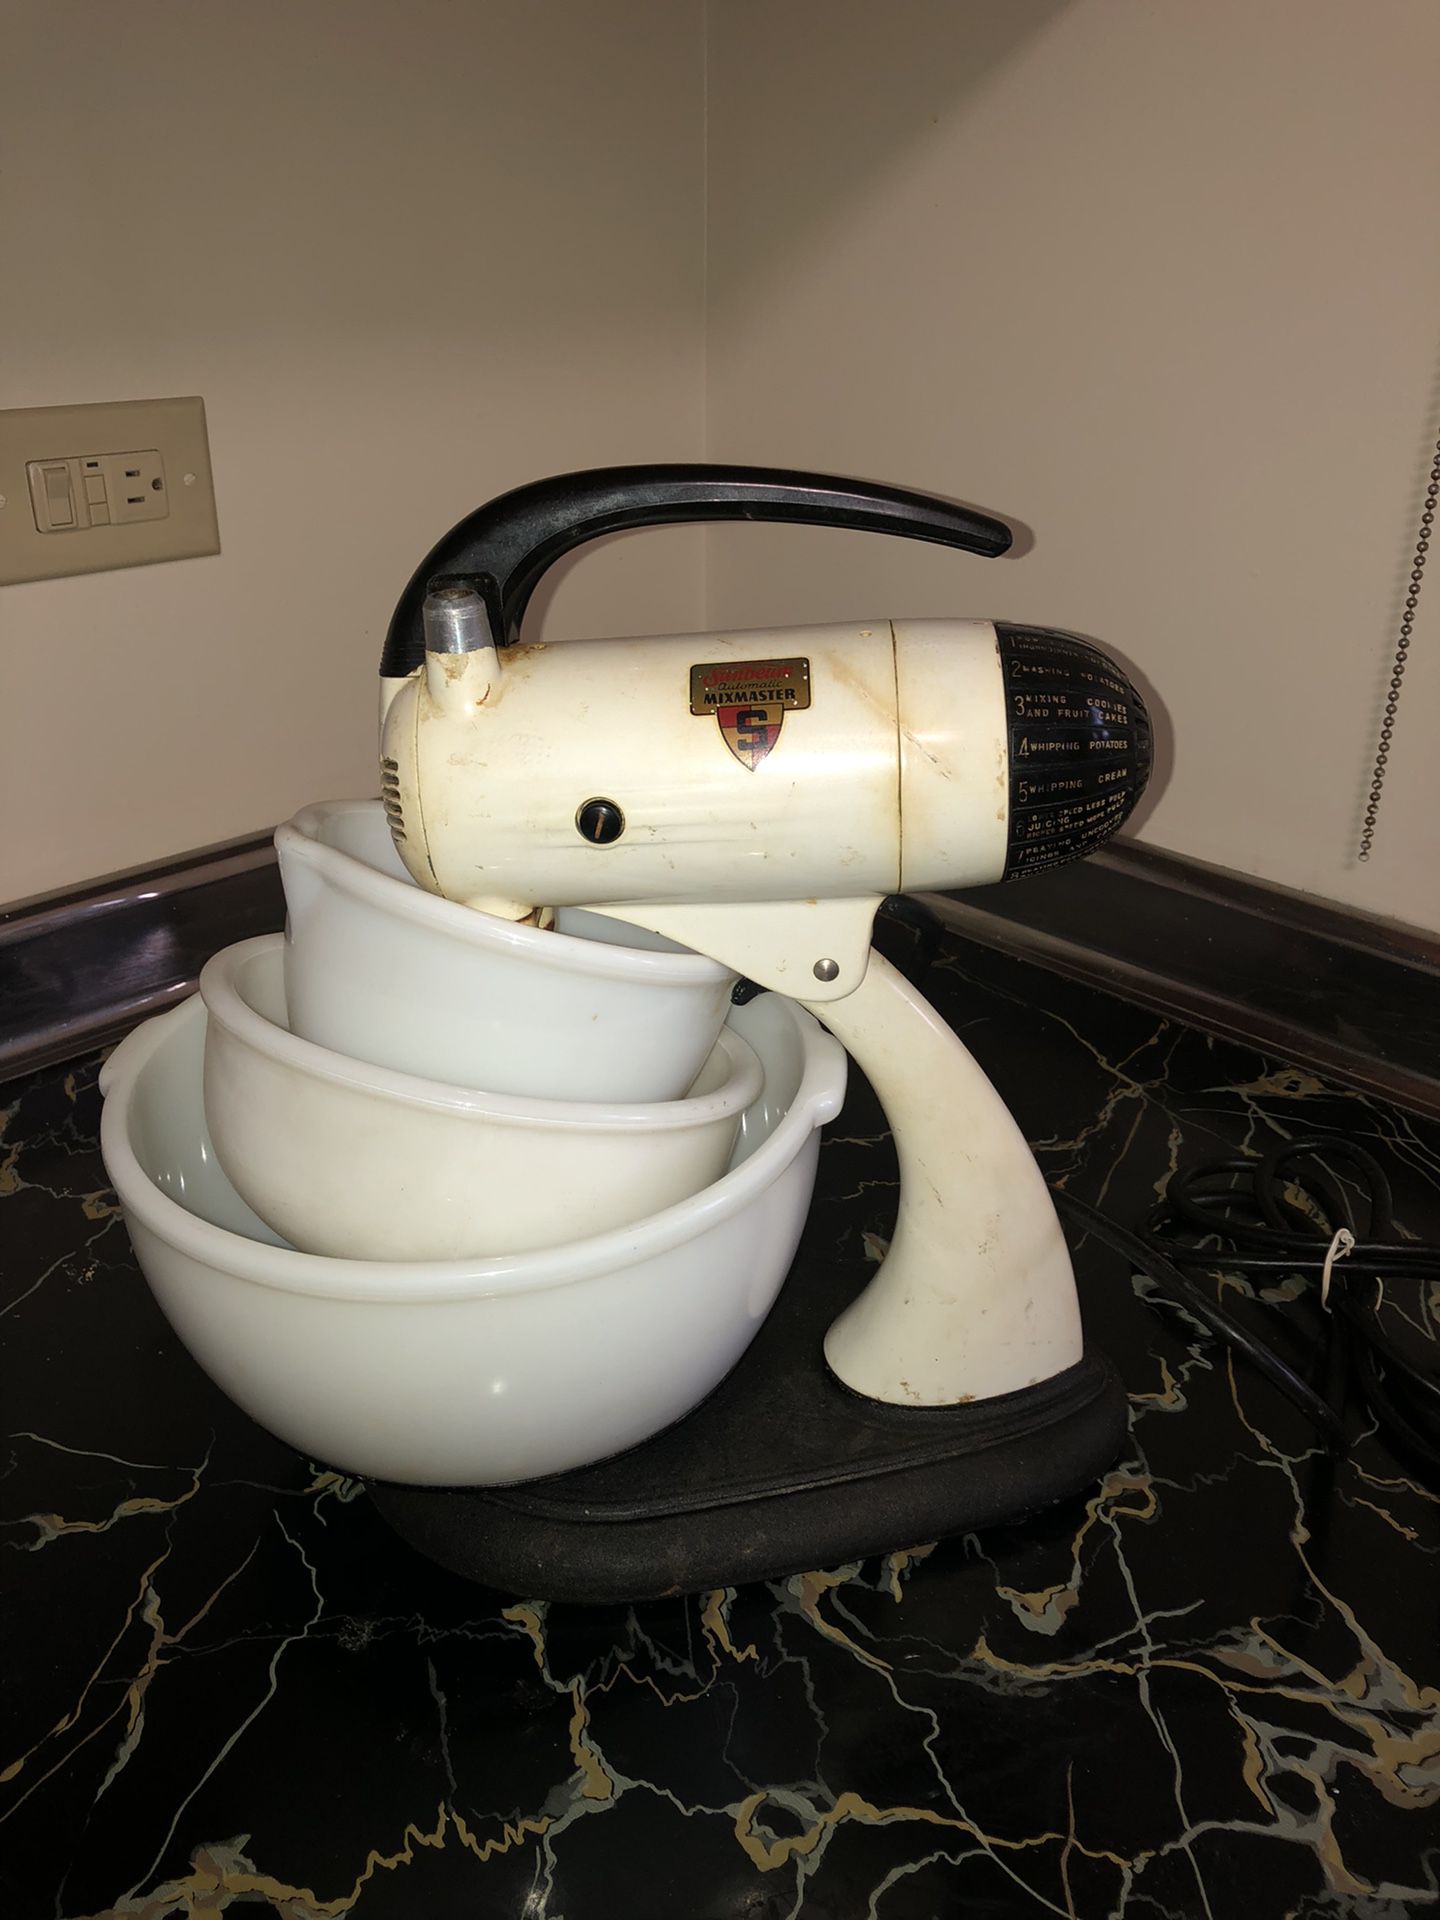 Sunbeam Mixer With Attachments for Sale in Orlando, FL - OfferUp